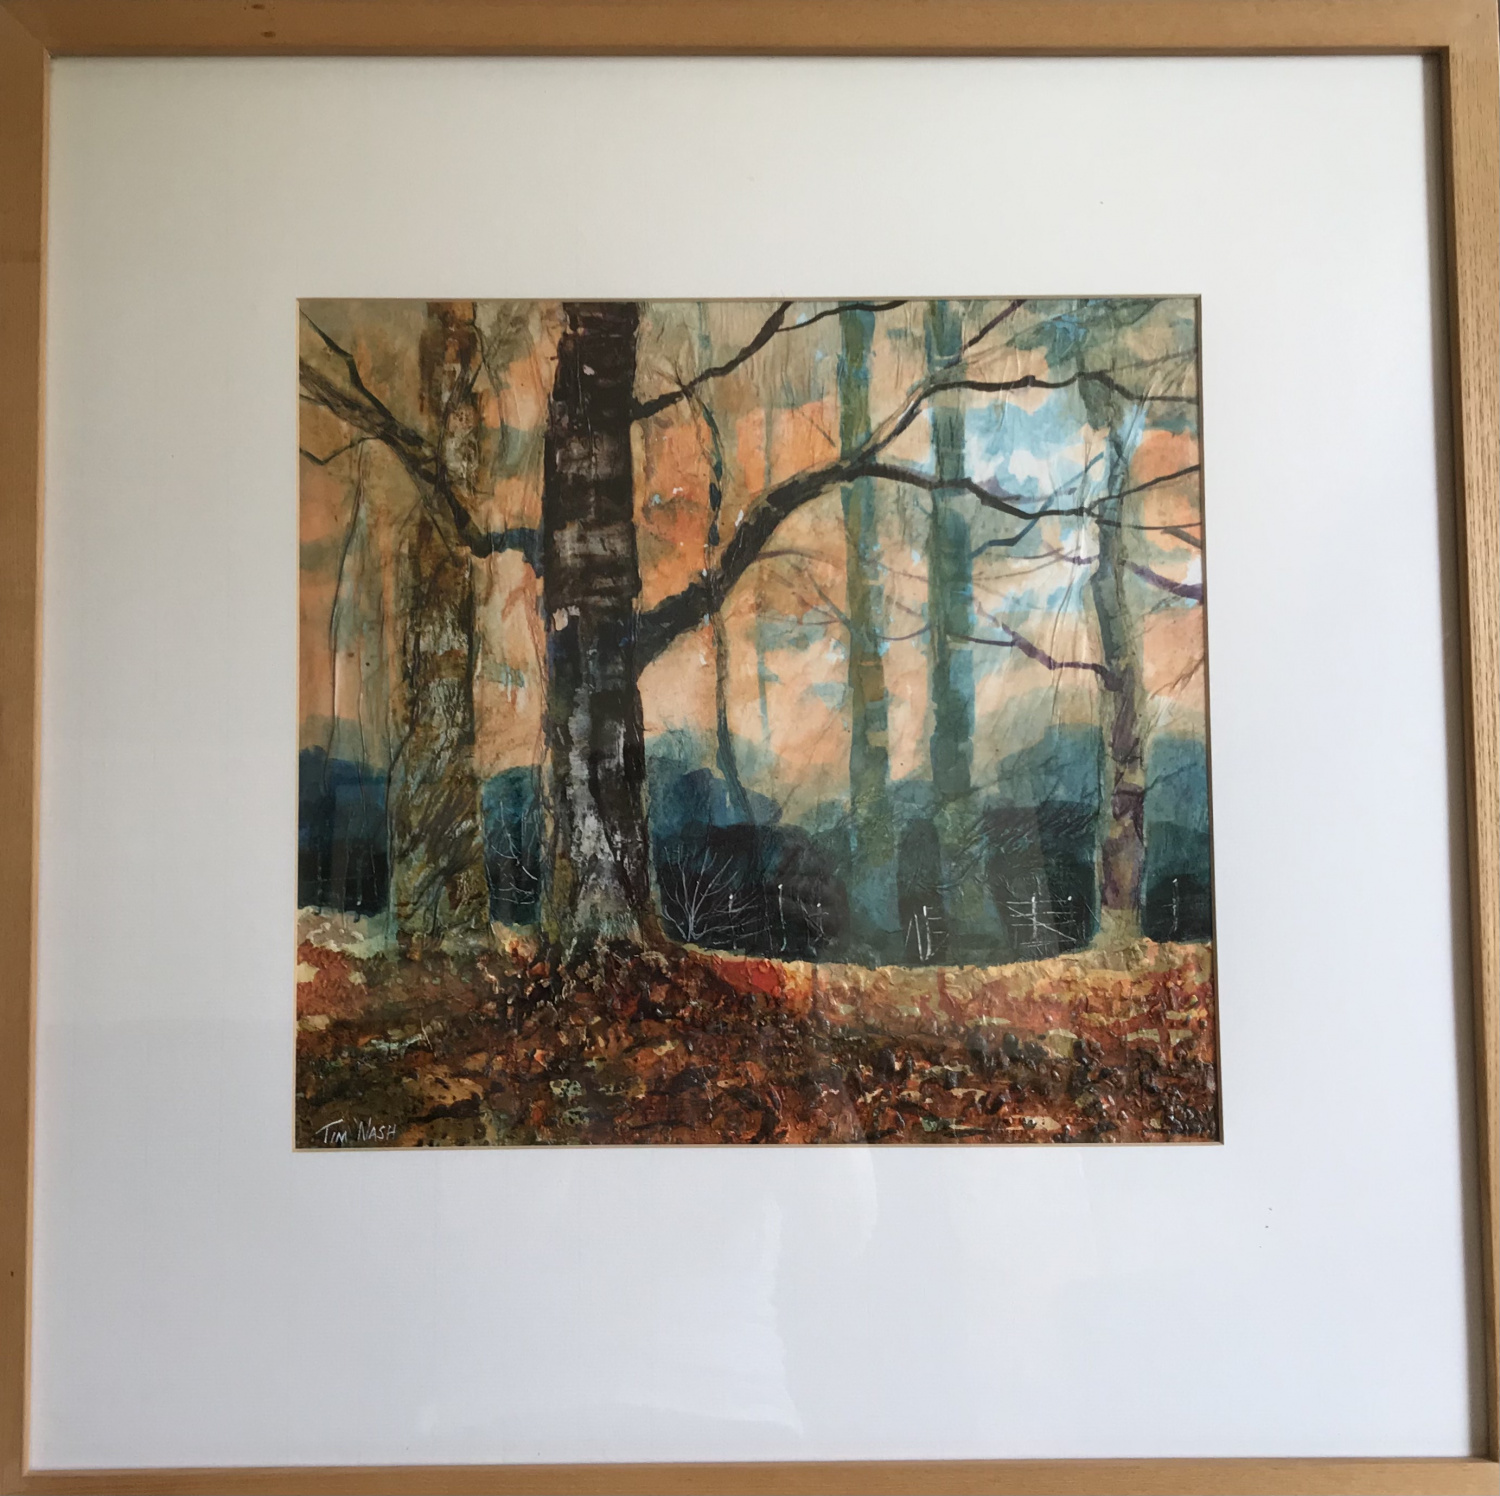 'Old Trees, Stow' by Tim Nash